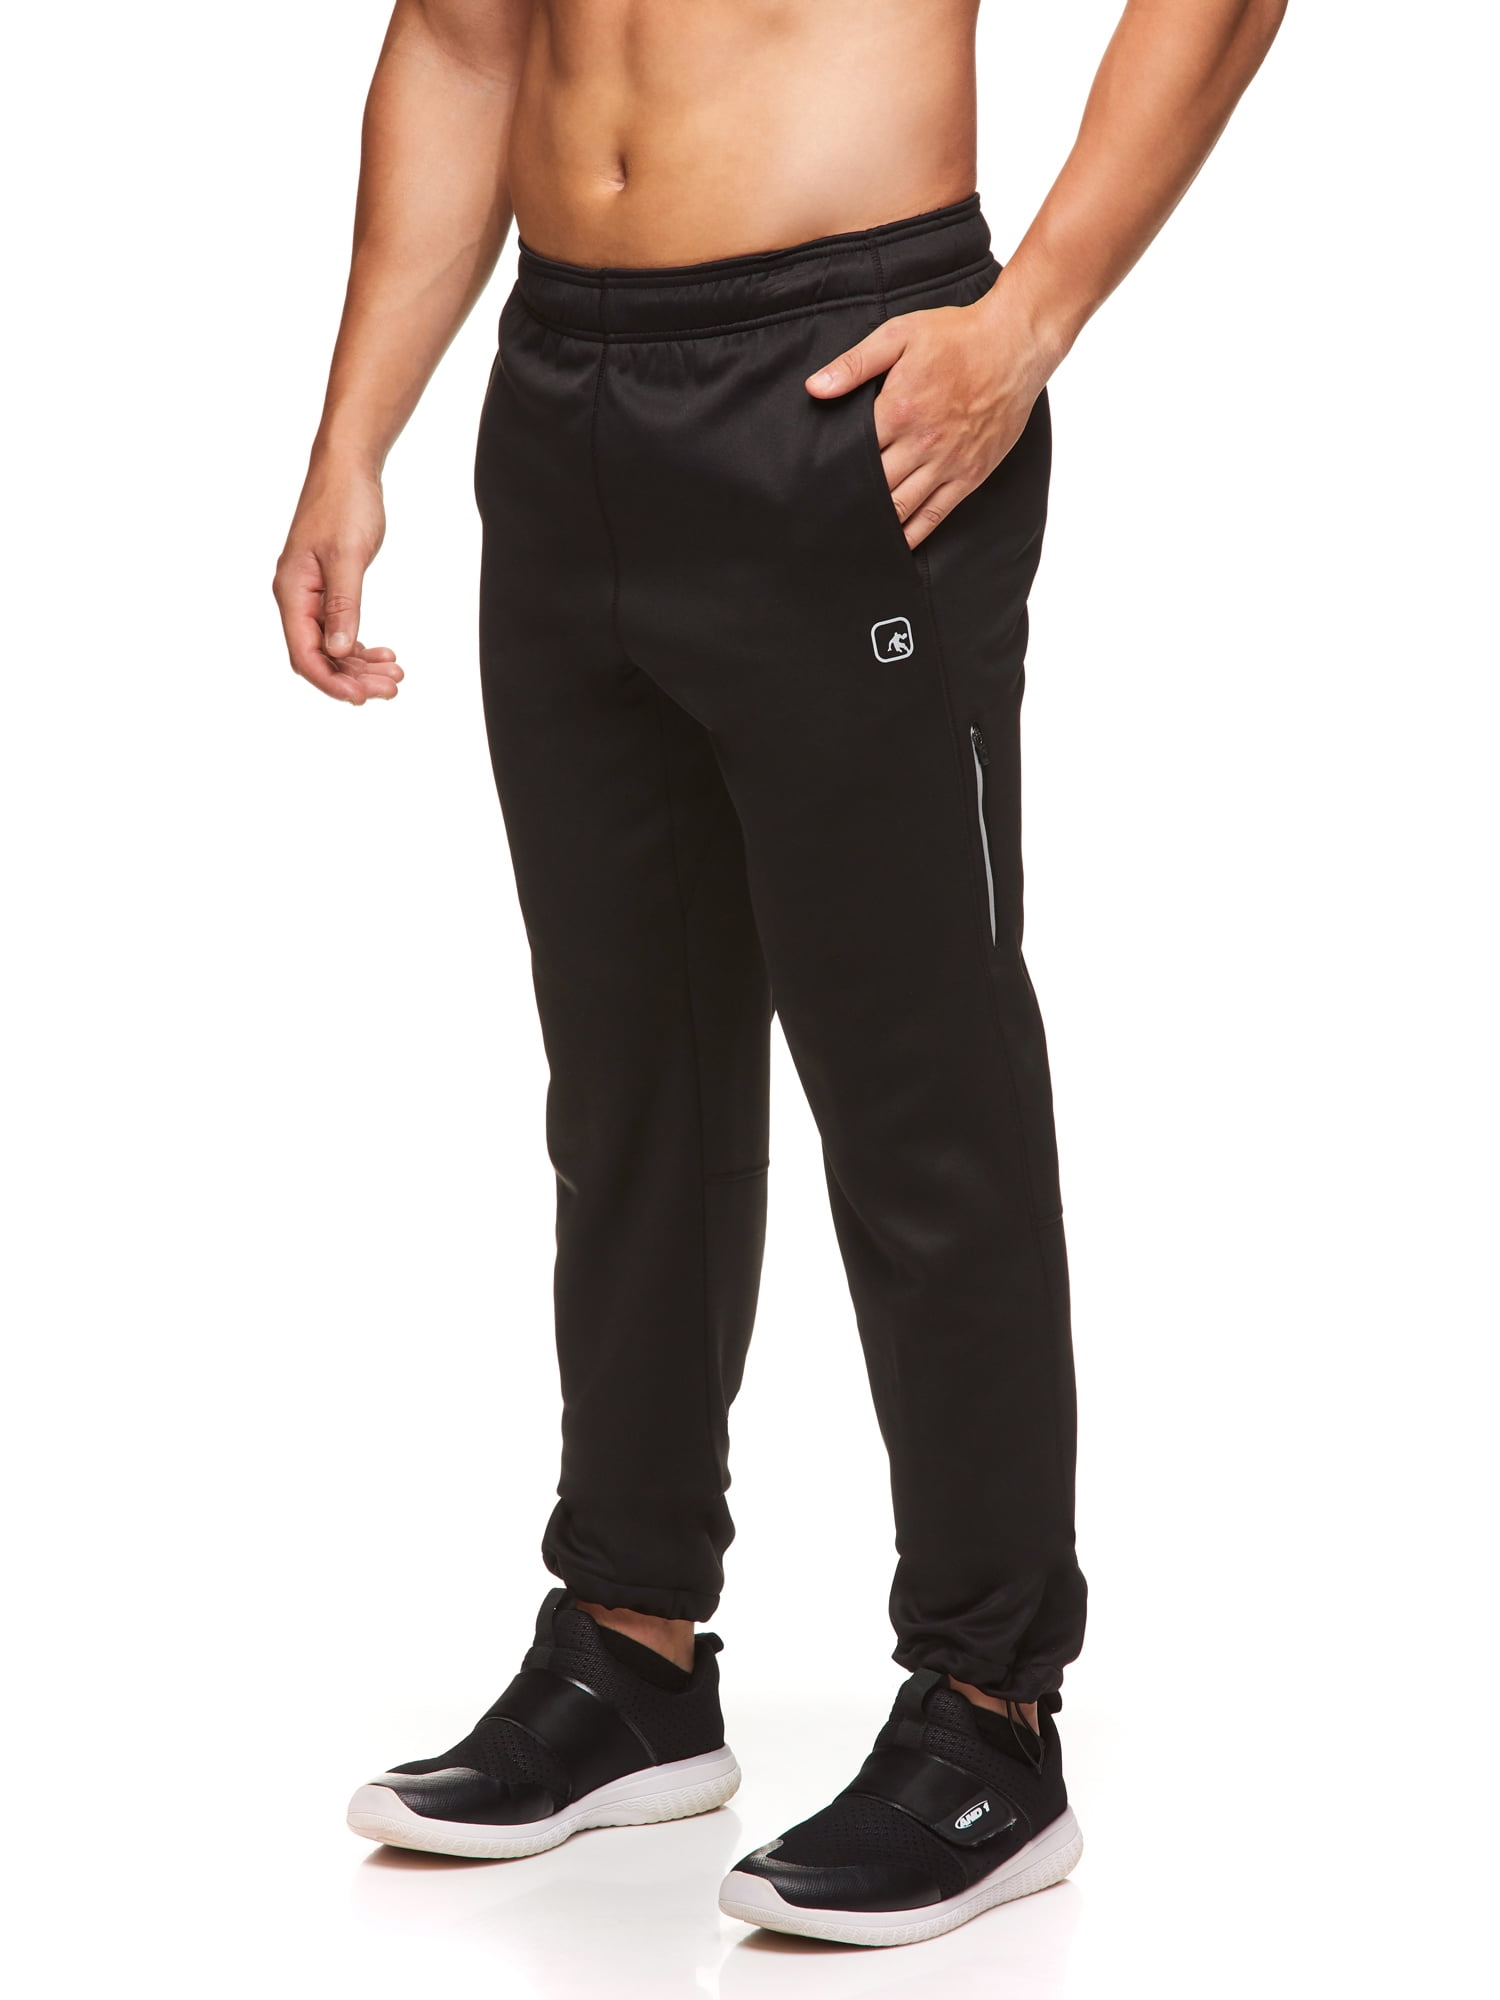 AND1 - AND1 Men's and Big Men's Active Tech Fleece Sweatpants, up to ...